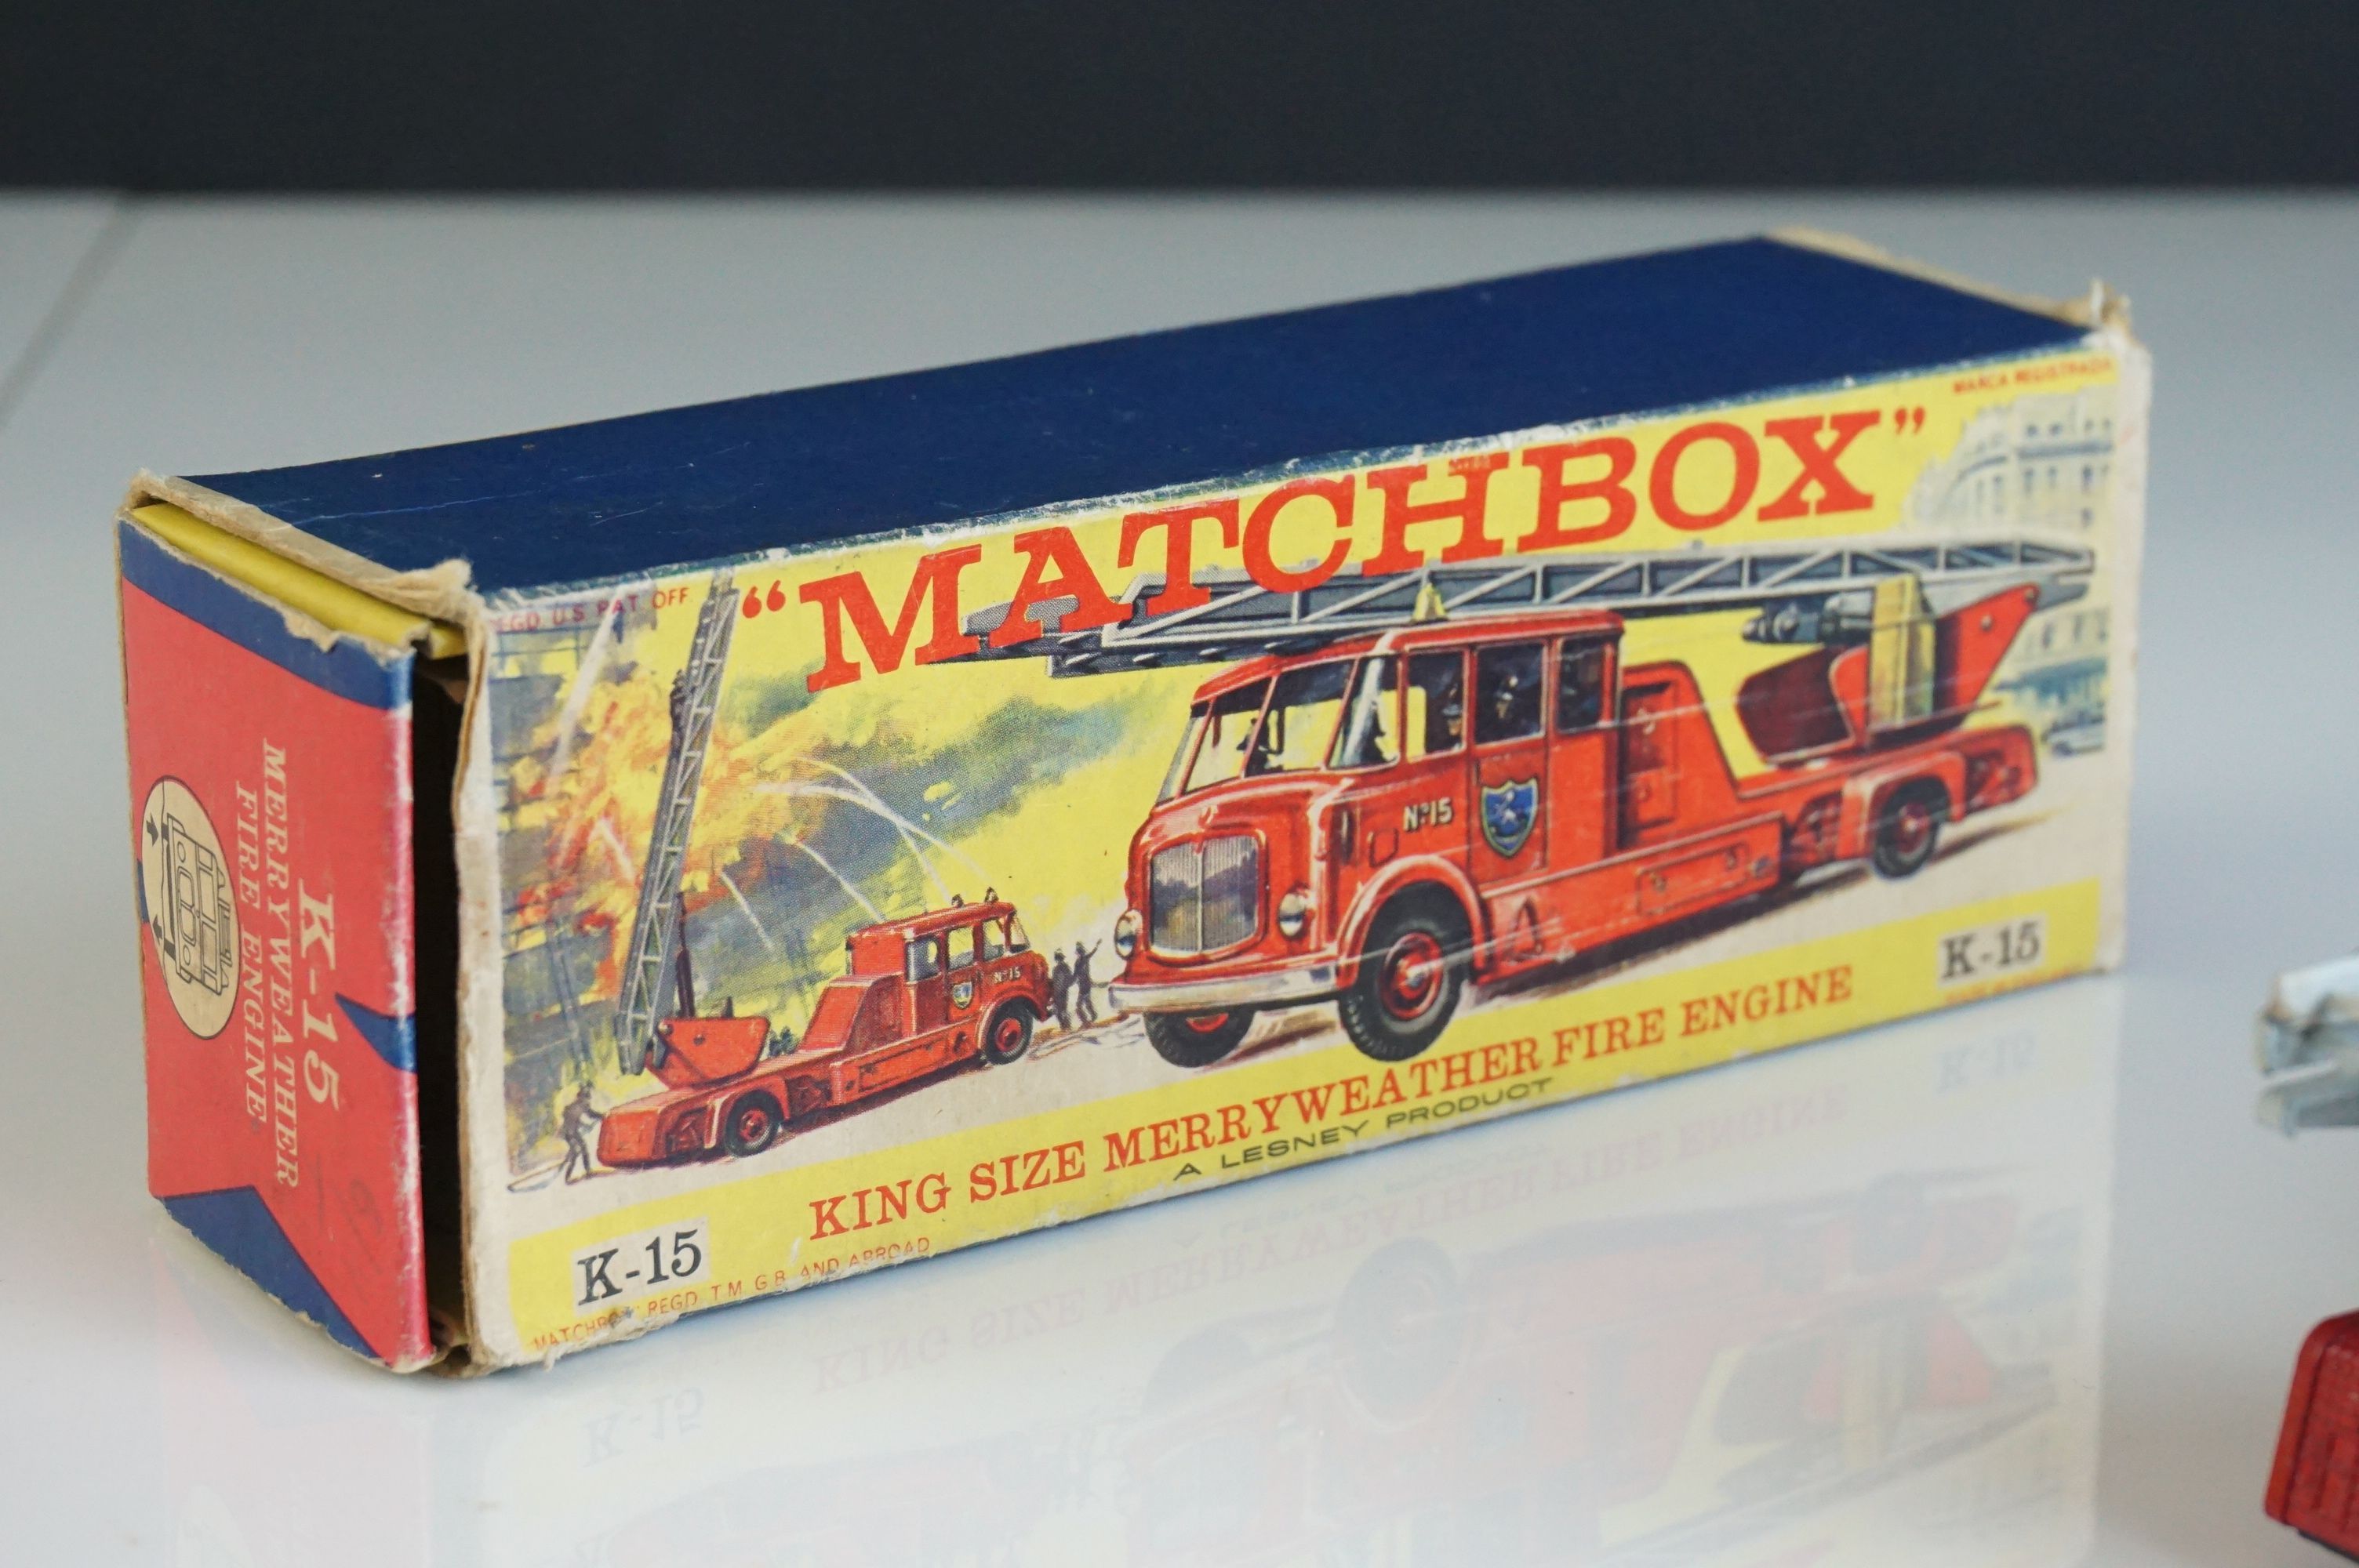 Boxed Matchbox K15 King Size Merryweather Fire Engine diecast model in vg condition with minimal - Image 6 of 8